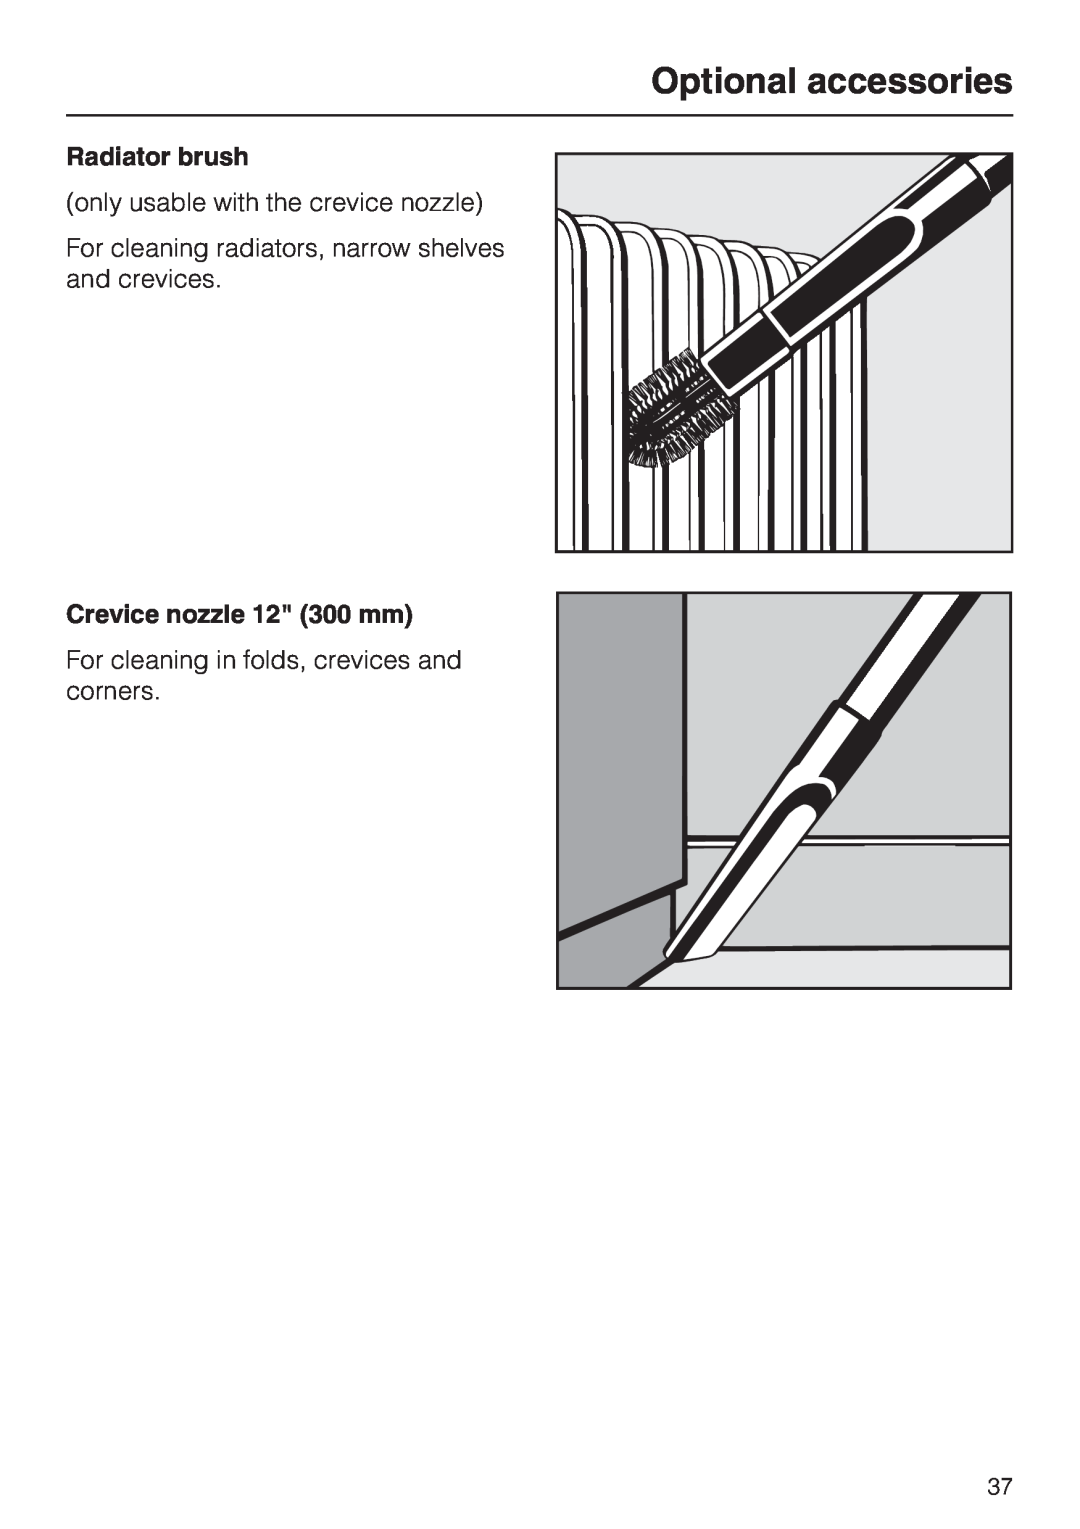 Miele S 5980 Optional accessories, Radiator brush, only usable with the crevice nozzle, Crevice nozzle 12 300 mm 